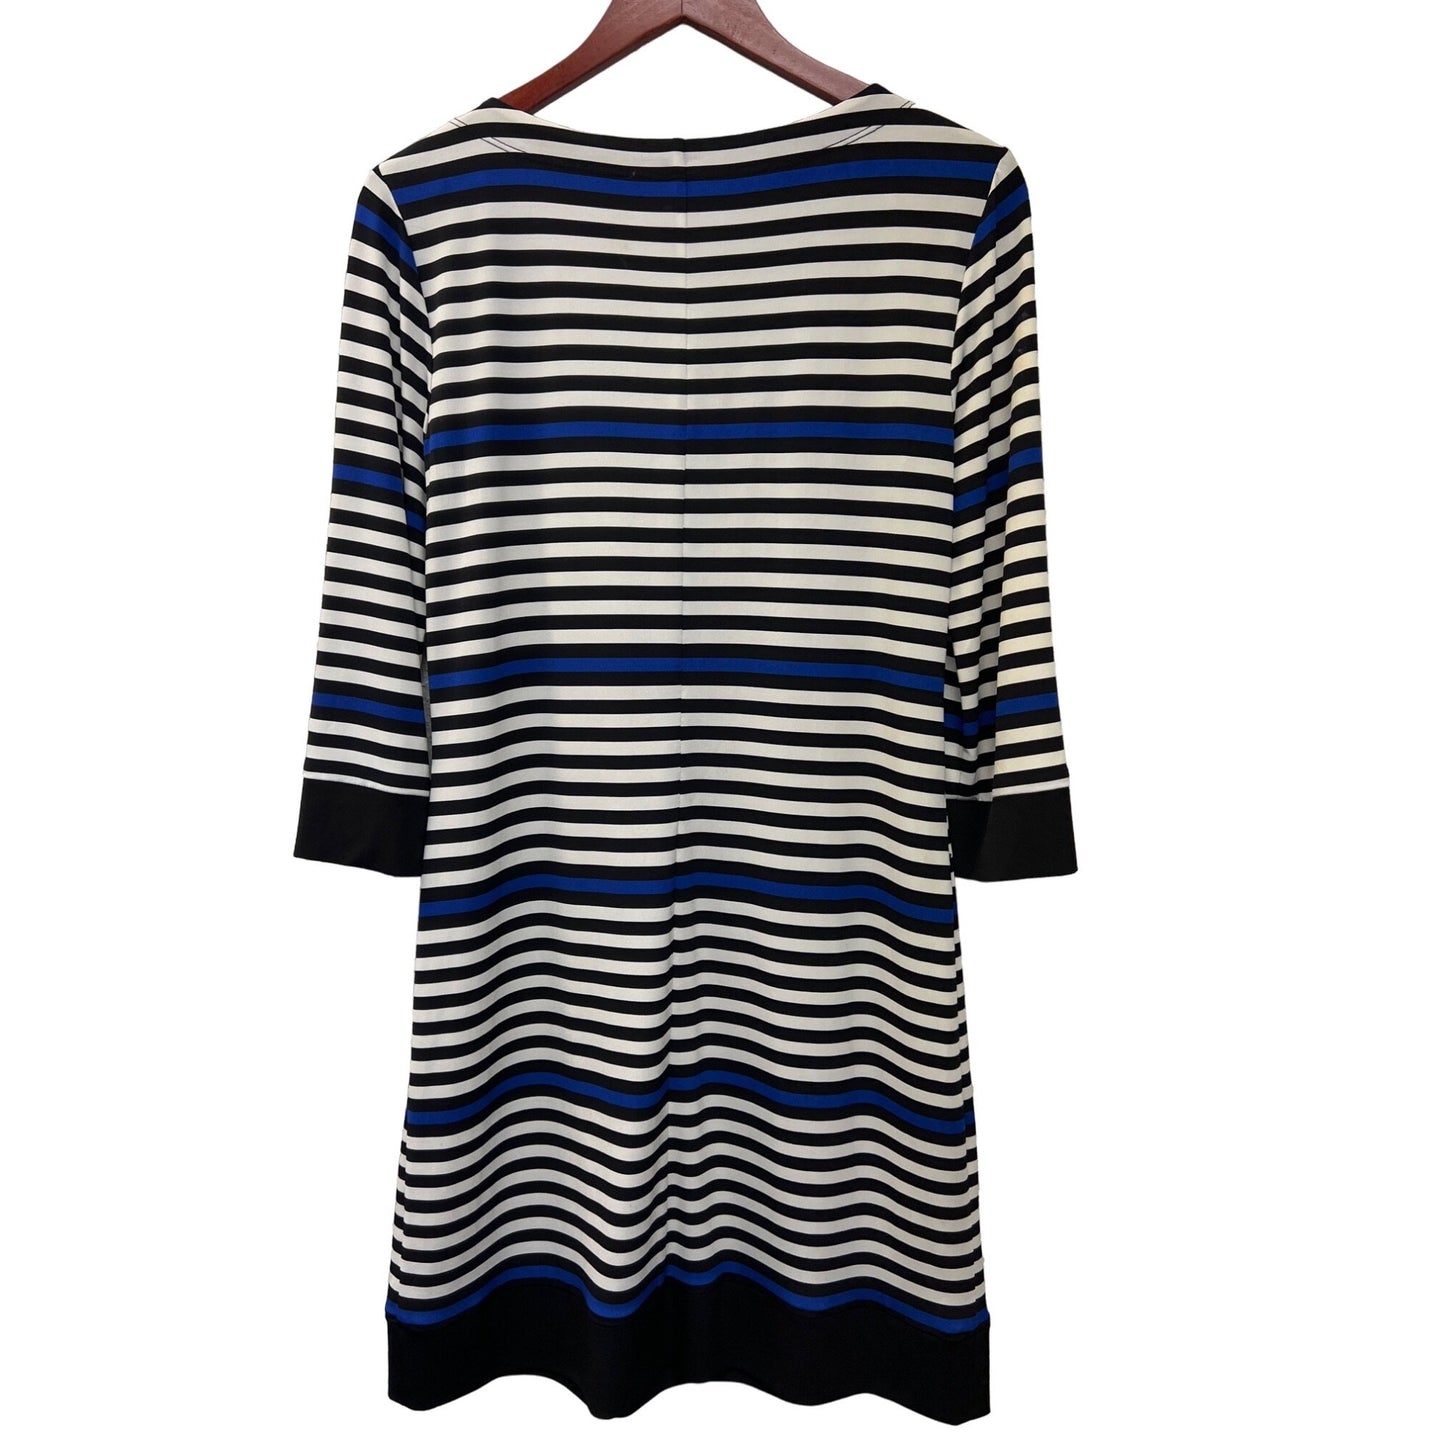 Laundry by Design Black White and Blue Striped Shirt Dress